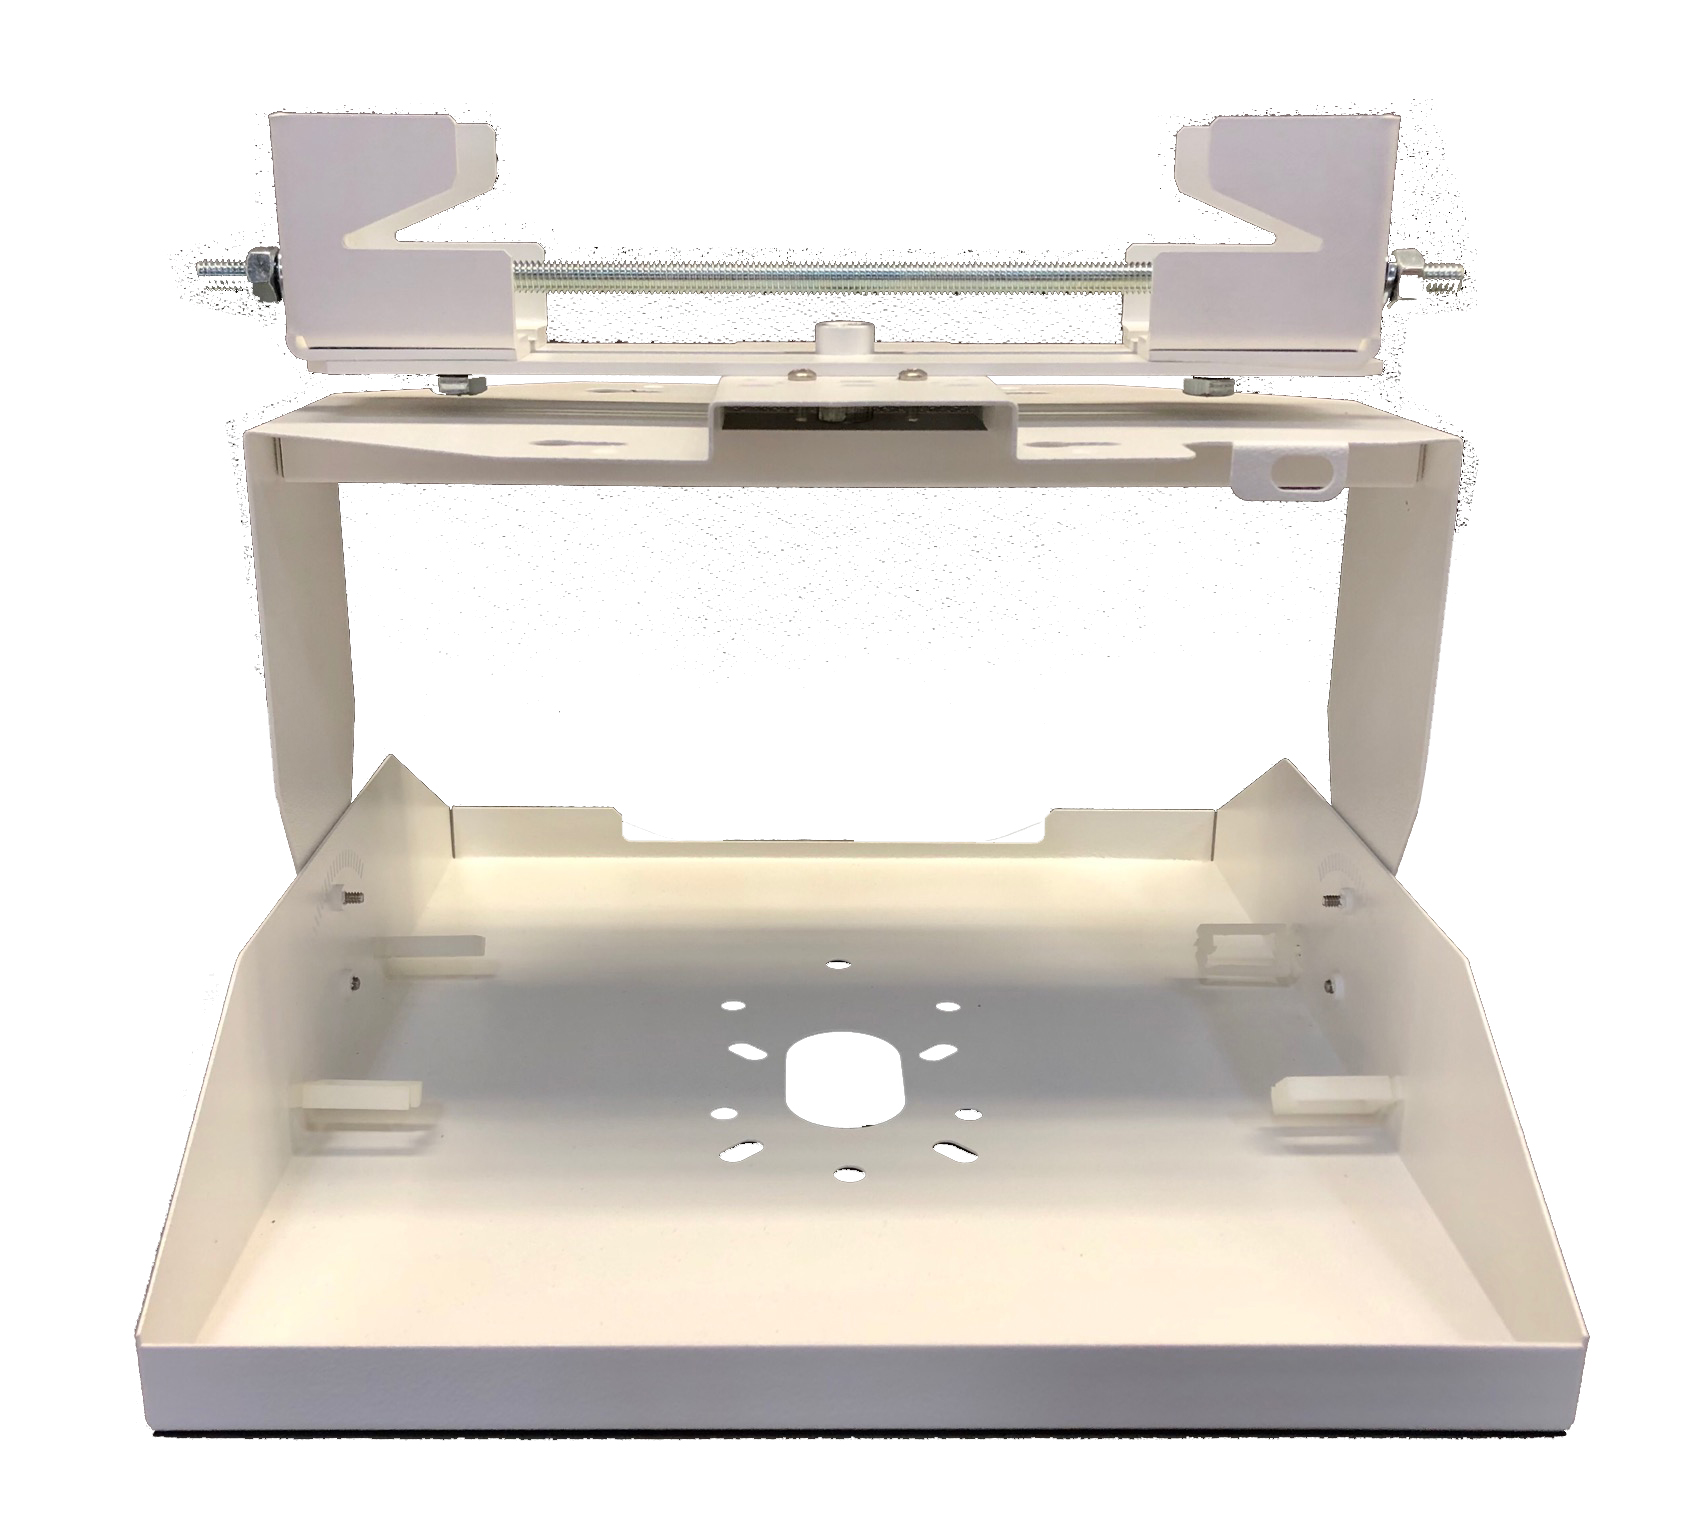 Single-Axis I-Beam Universal Co-Location Mount for Cisco 9100 Series and Aruba 500 Series APs and Wi-Fi Antennas